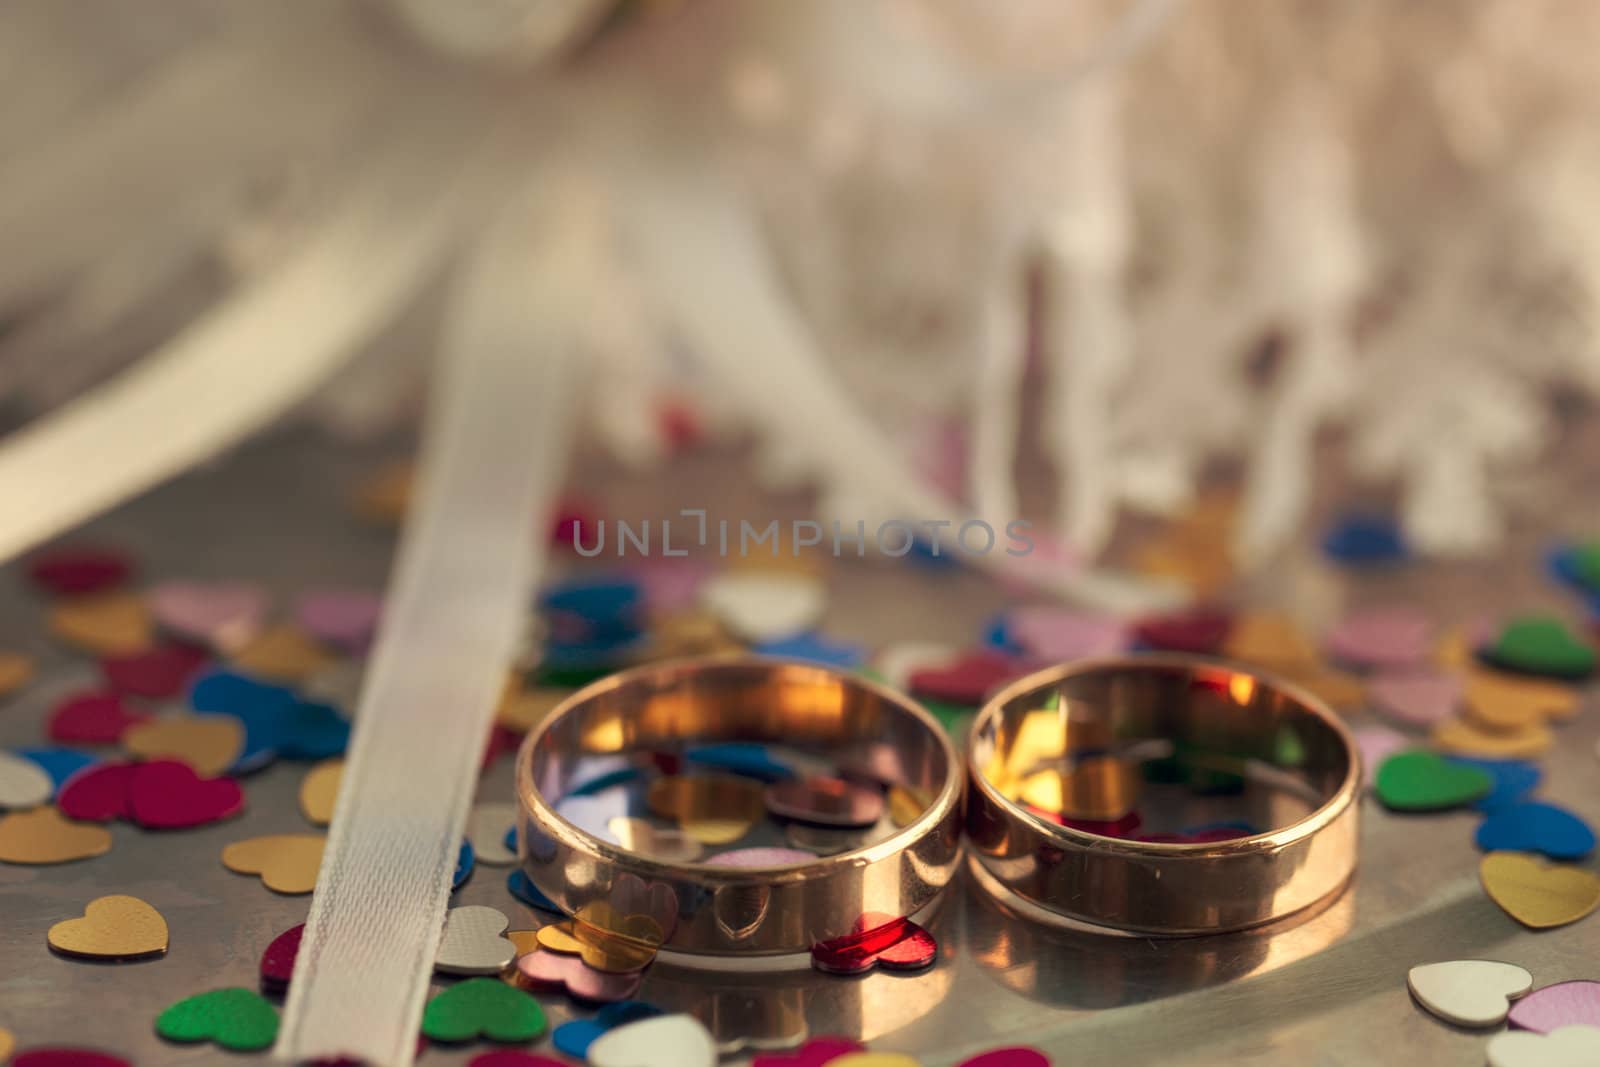 Two wedding rings on a background garters hearts scattered around